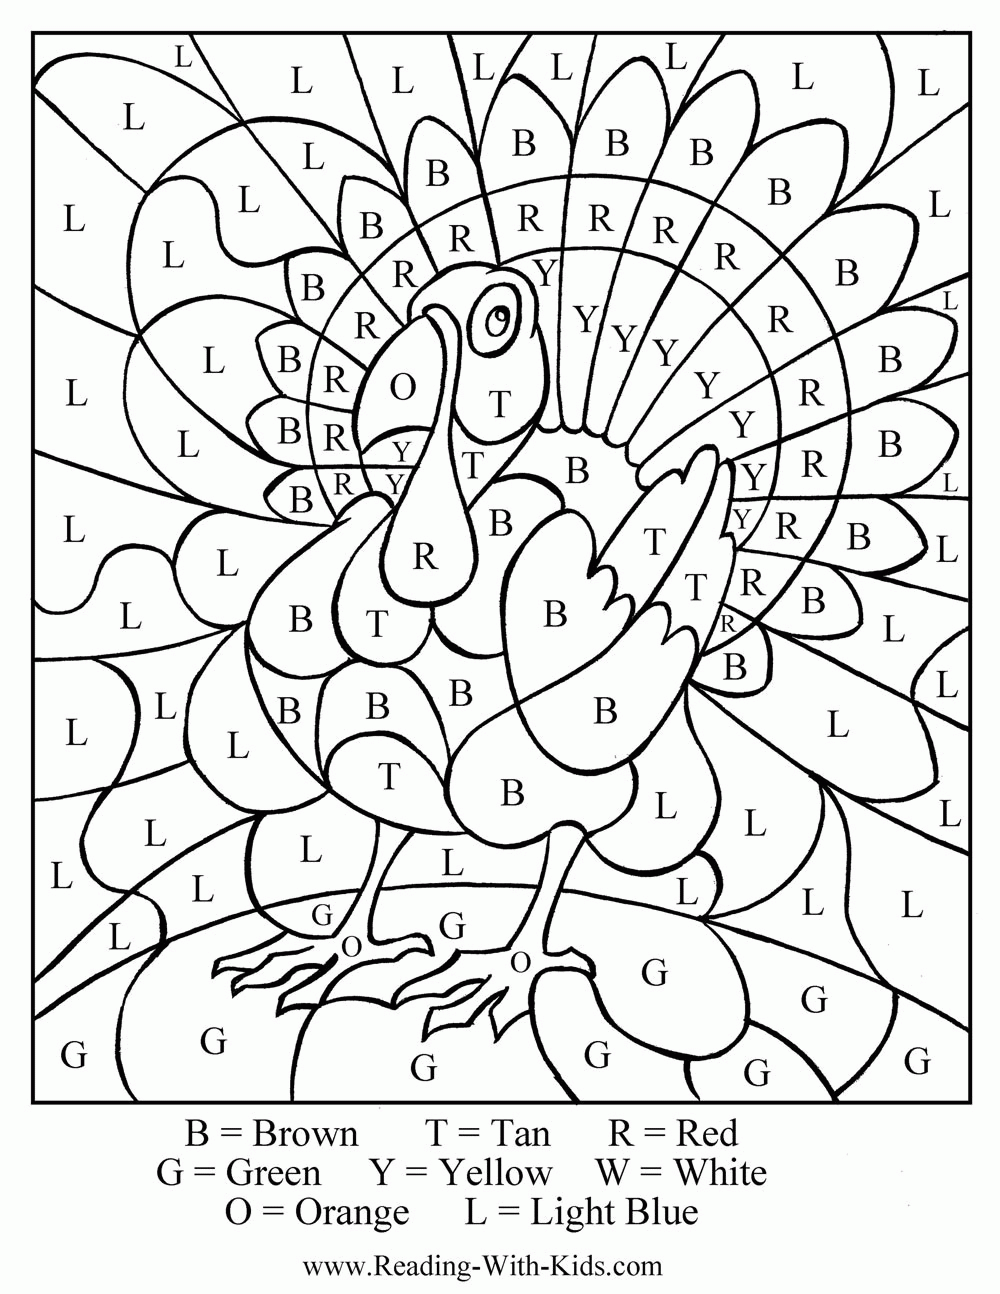 Printable Thanksgiving - Coloring Pages for Kids and for Adults